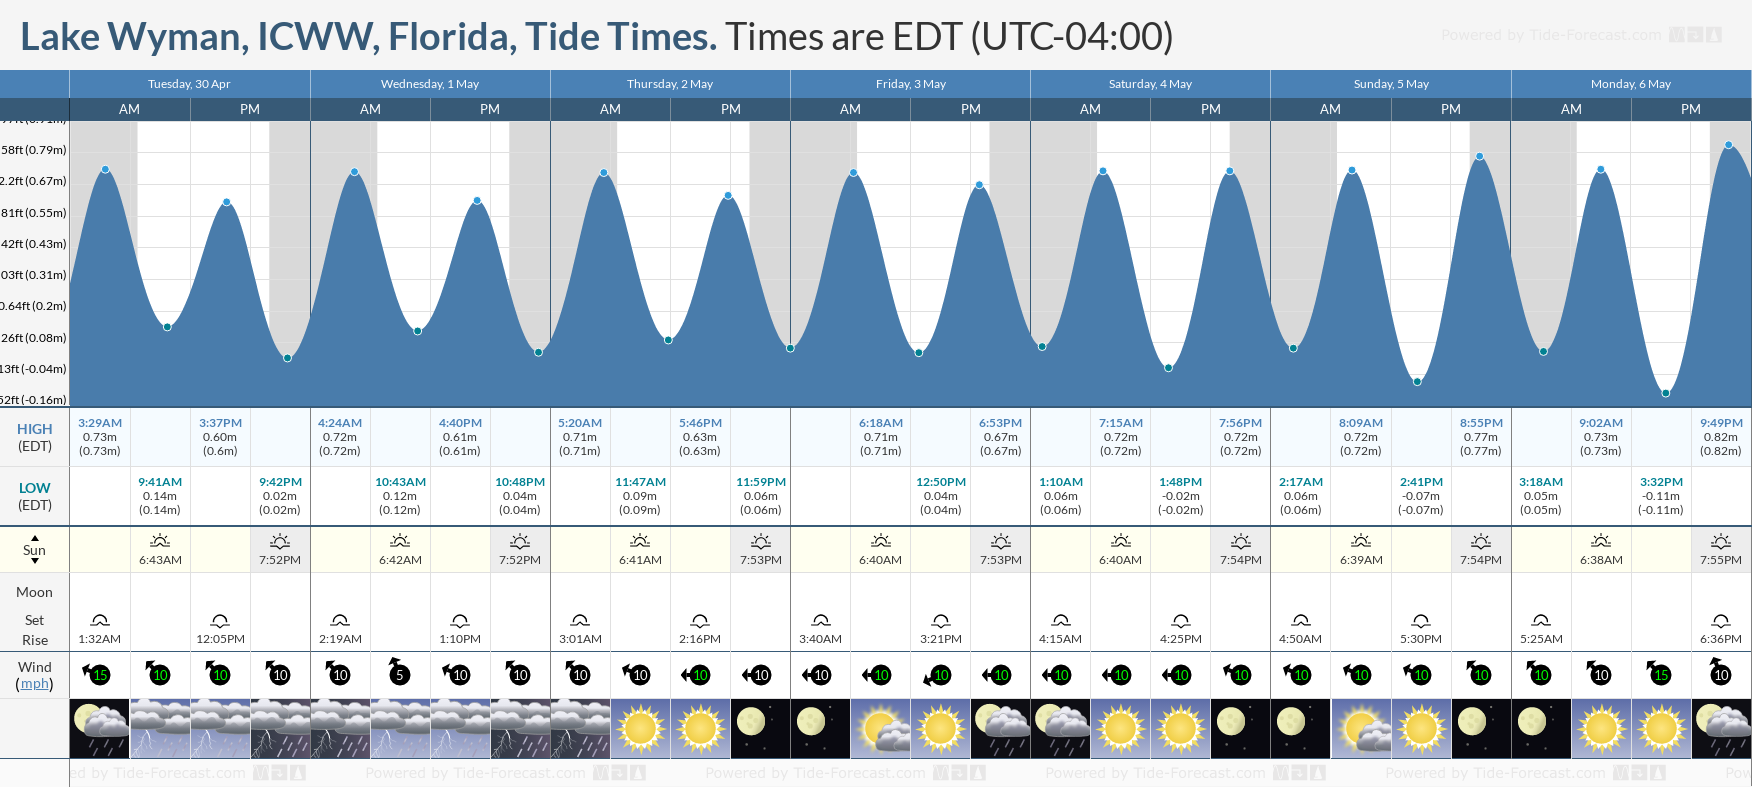 Lake Wyman, ICWW, Florida Tide Chart including high and low tide tide times for the next 7 days